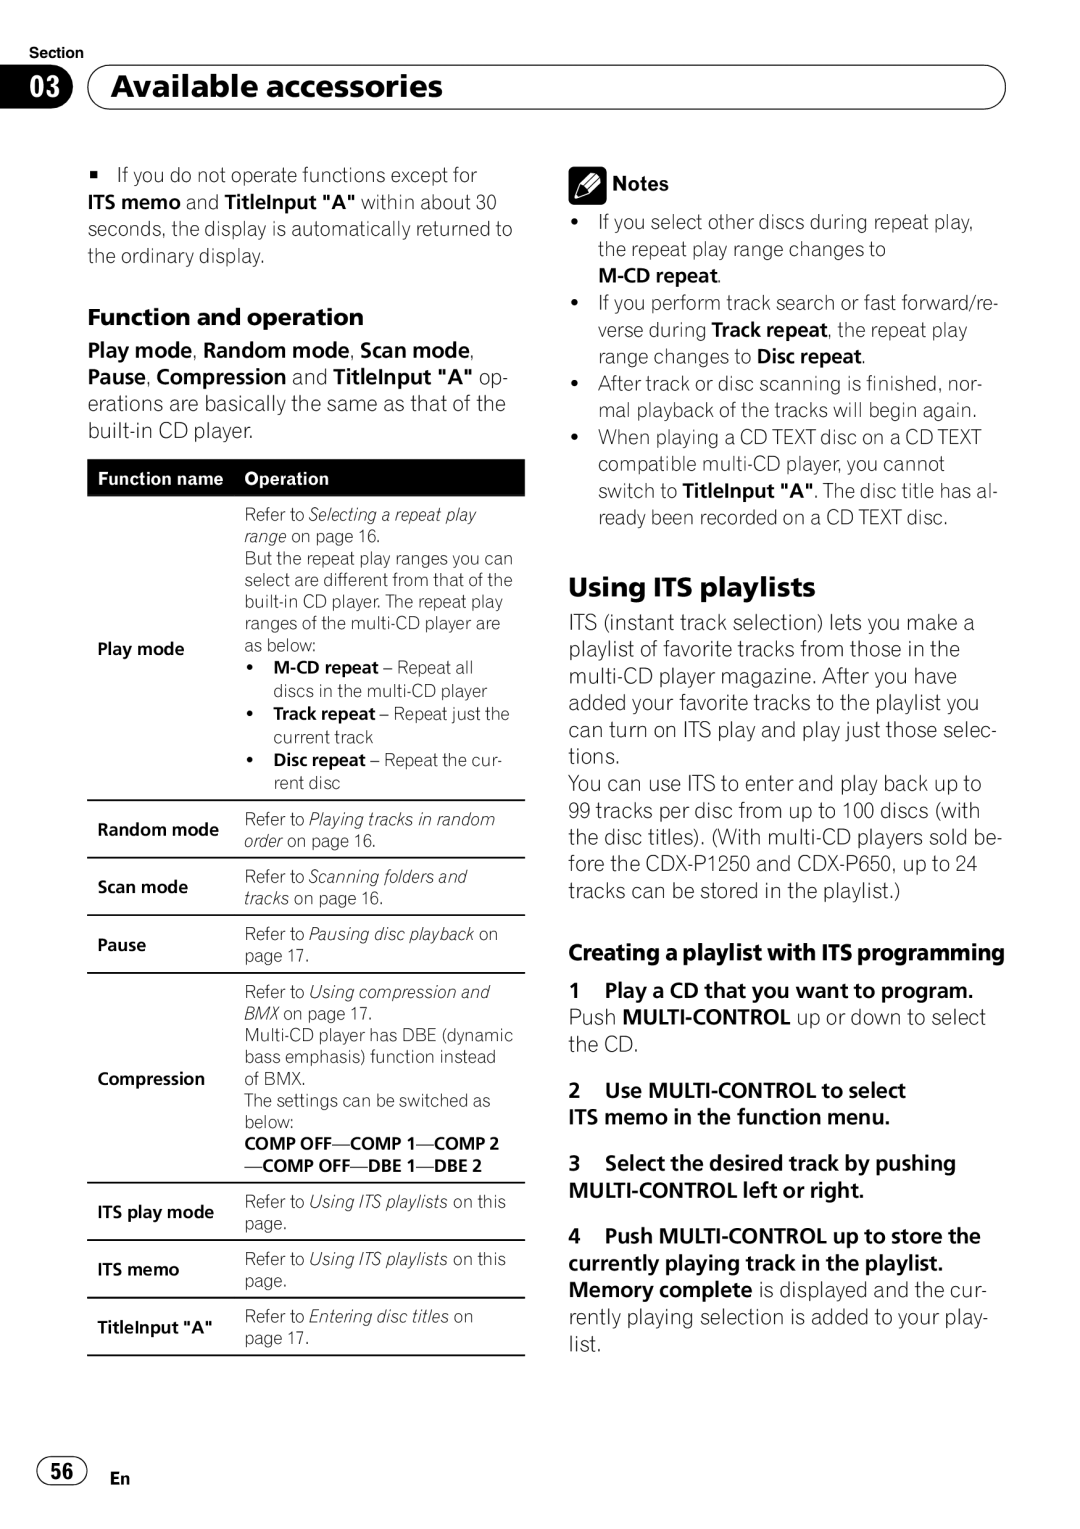 Pioneer DEH-P690UB operation manual Using ITS playlists, Creating a playlist with ITS programming, 03Available accessories 